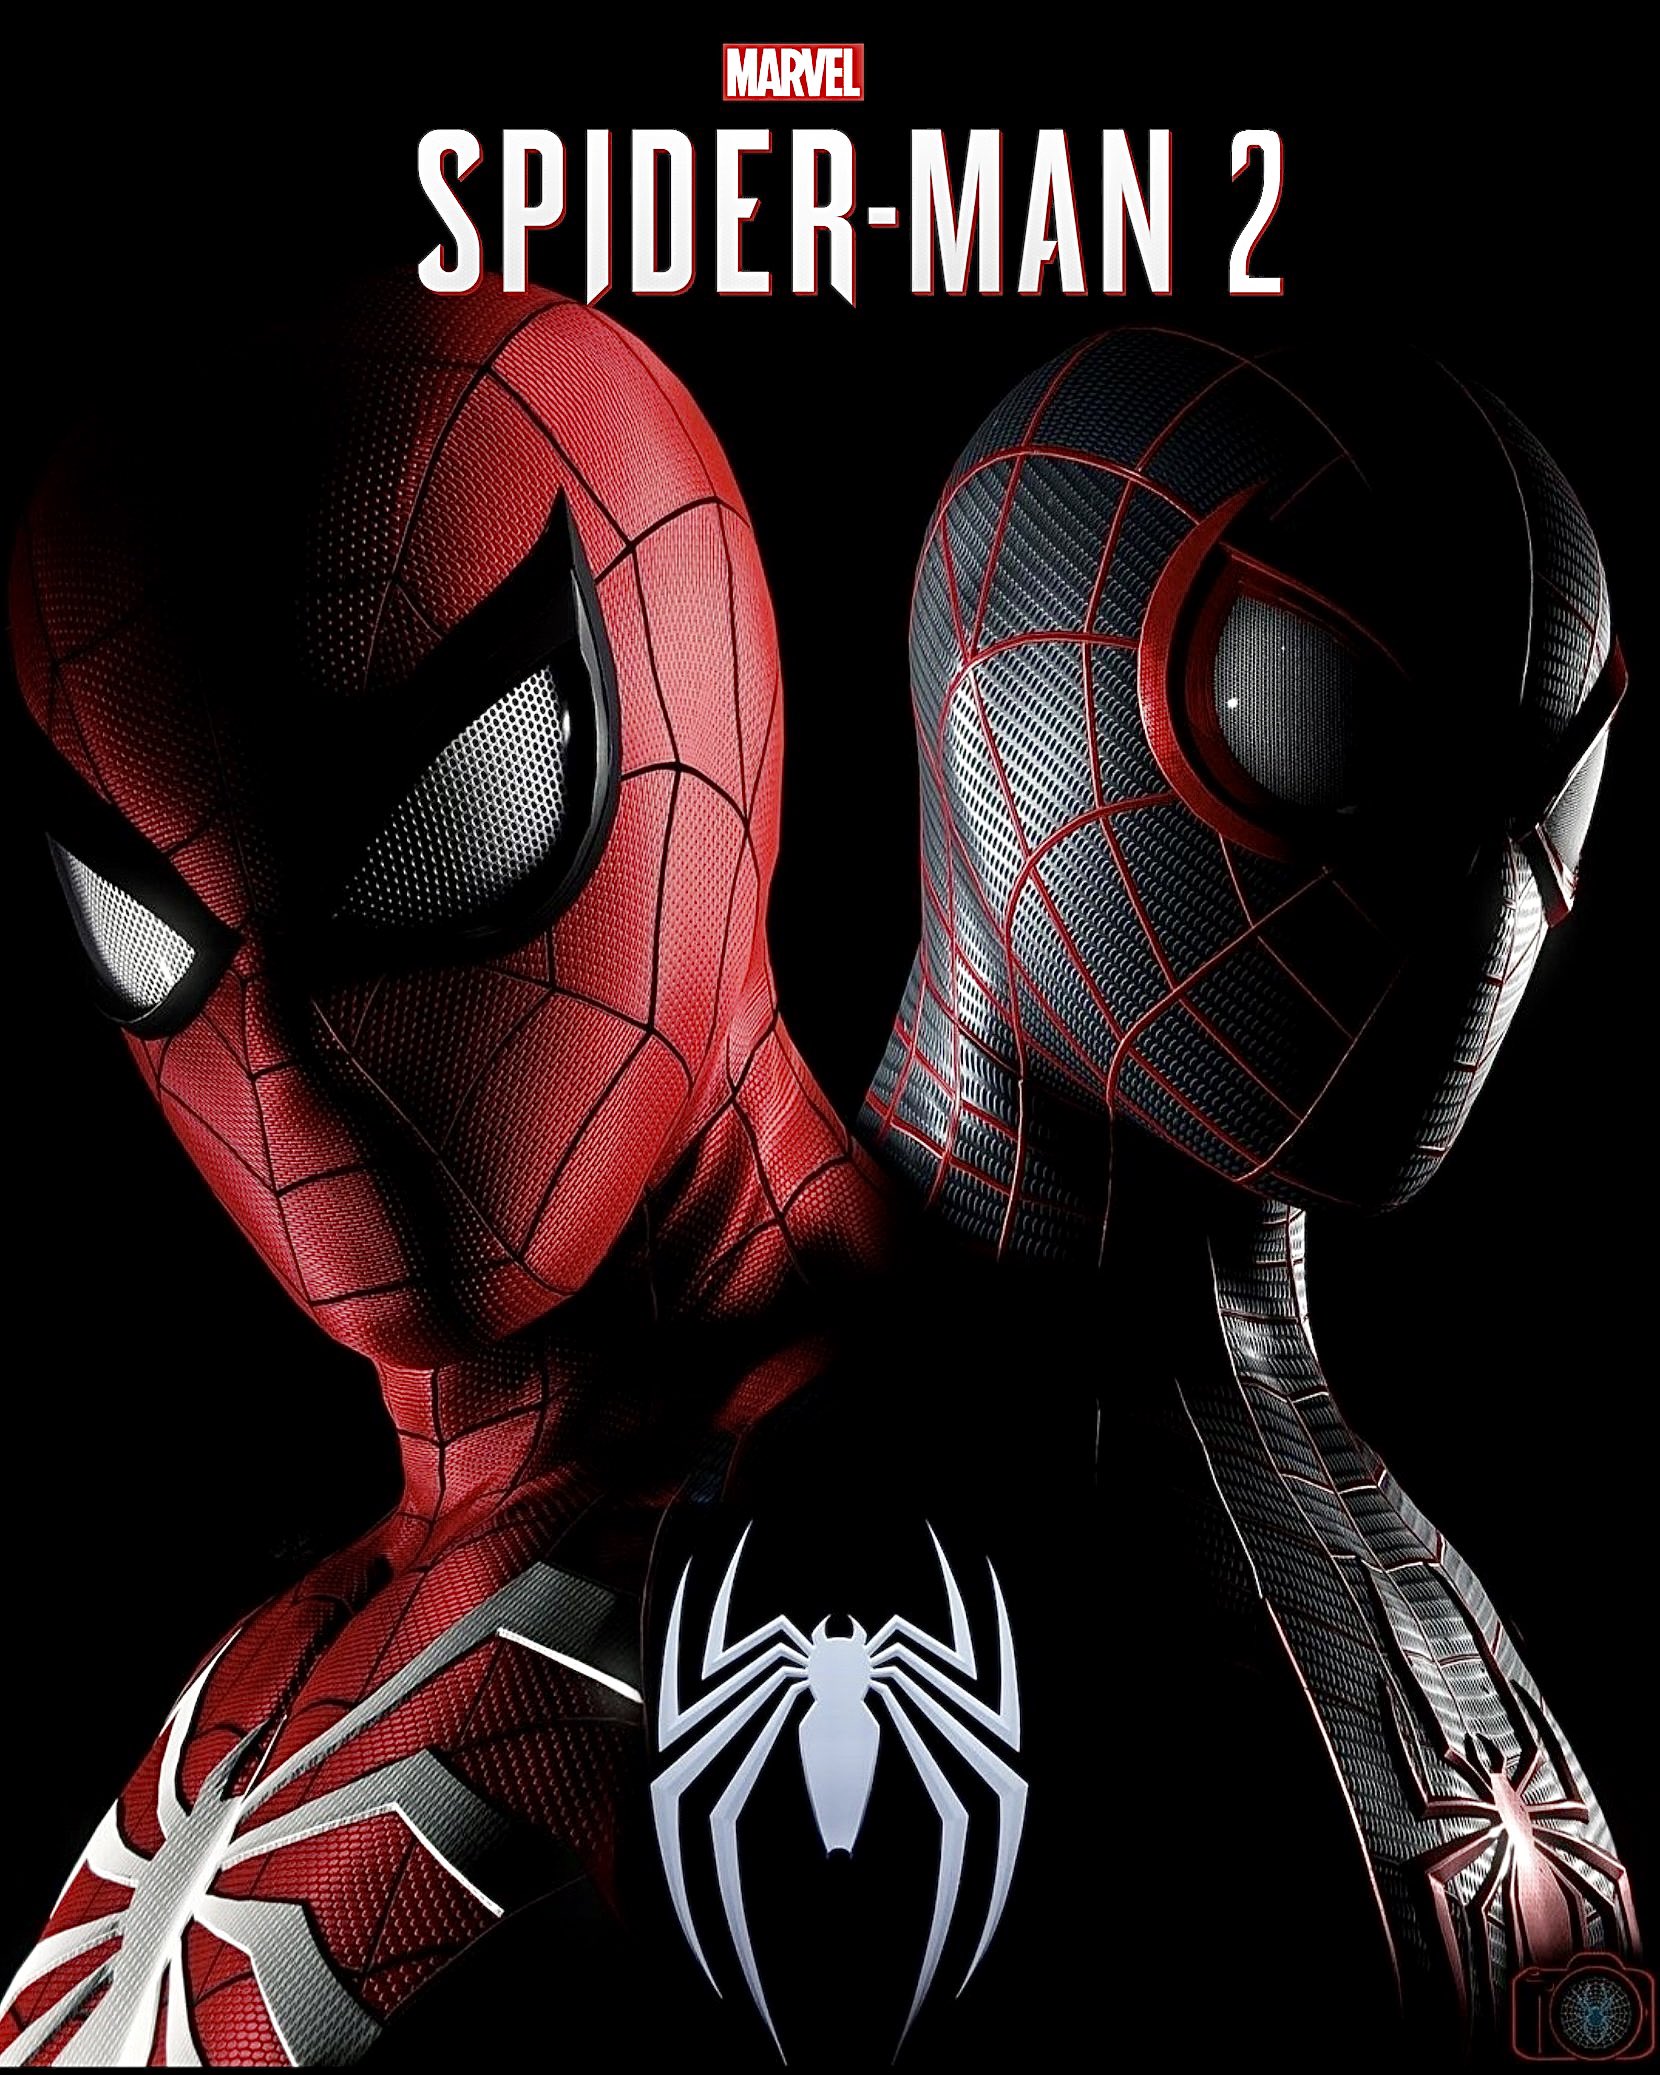 on Twitter: "Marvel's Spider-Man 2 will come out fall 2023 exclusively on #PS5 #SpiderManPS5 #SpiderMan2PS5 / Twitter